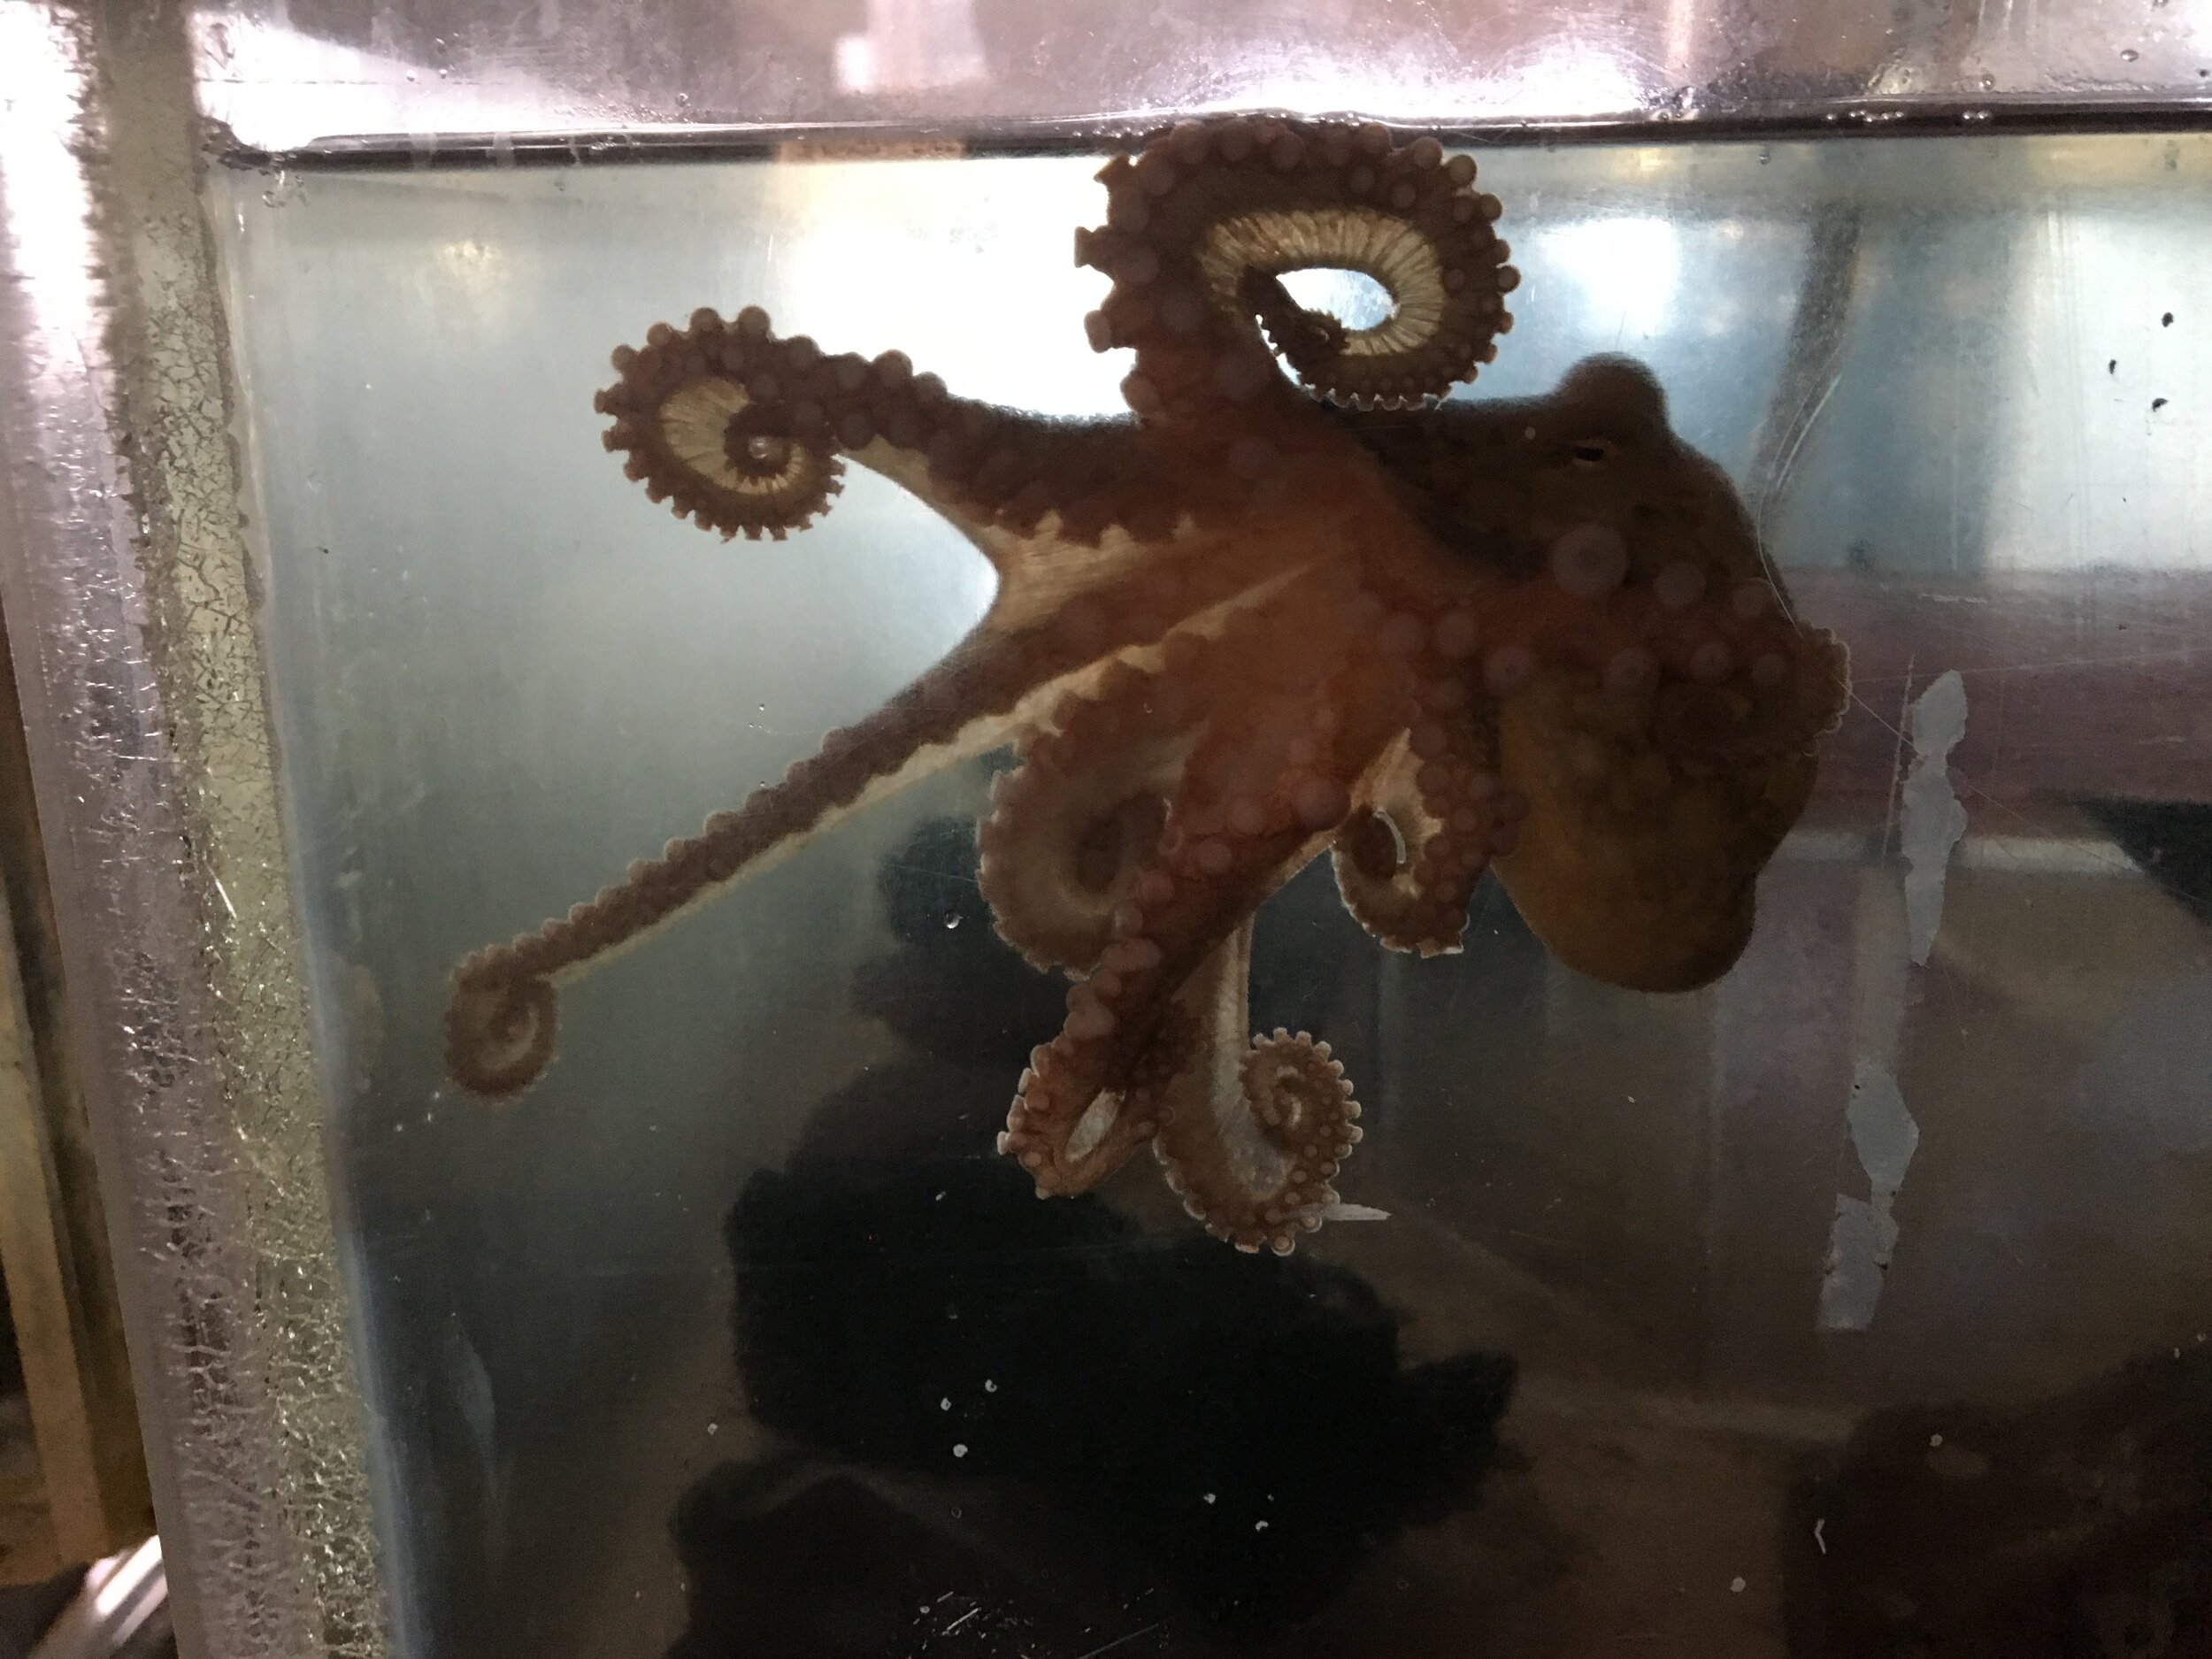  The octopus is curious and intelligent, yet so alien! 